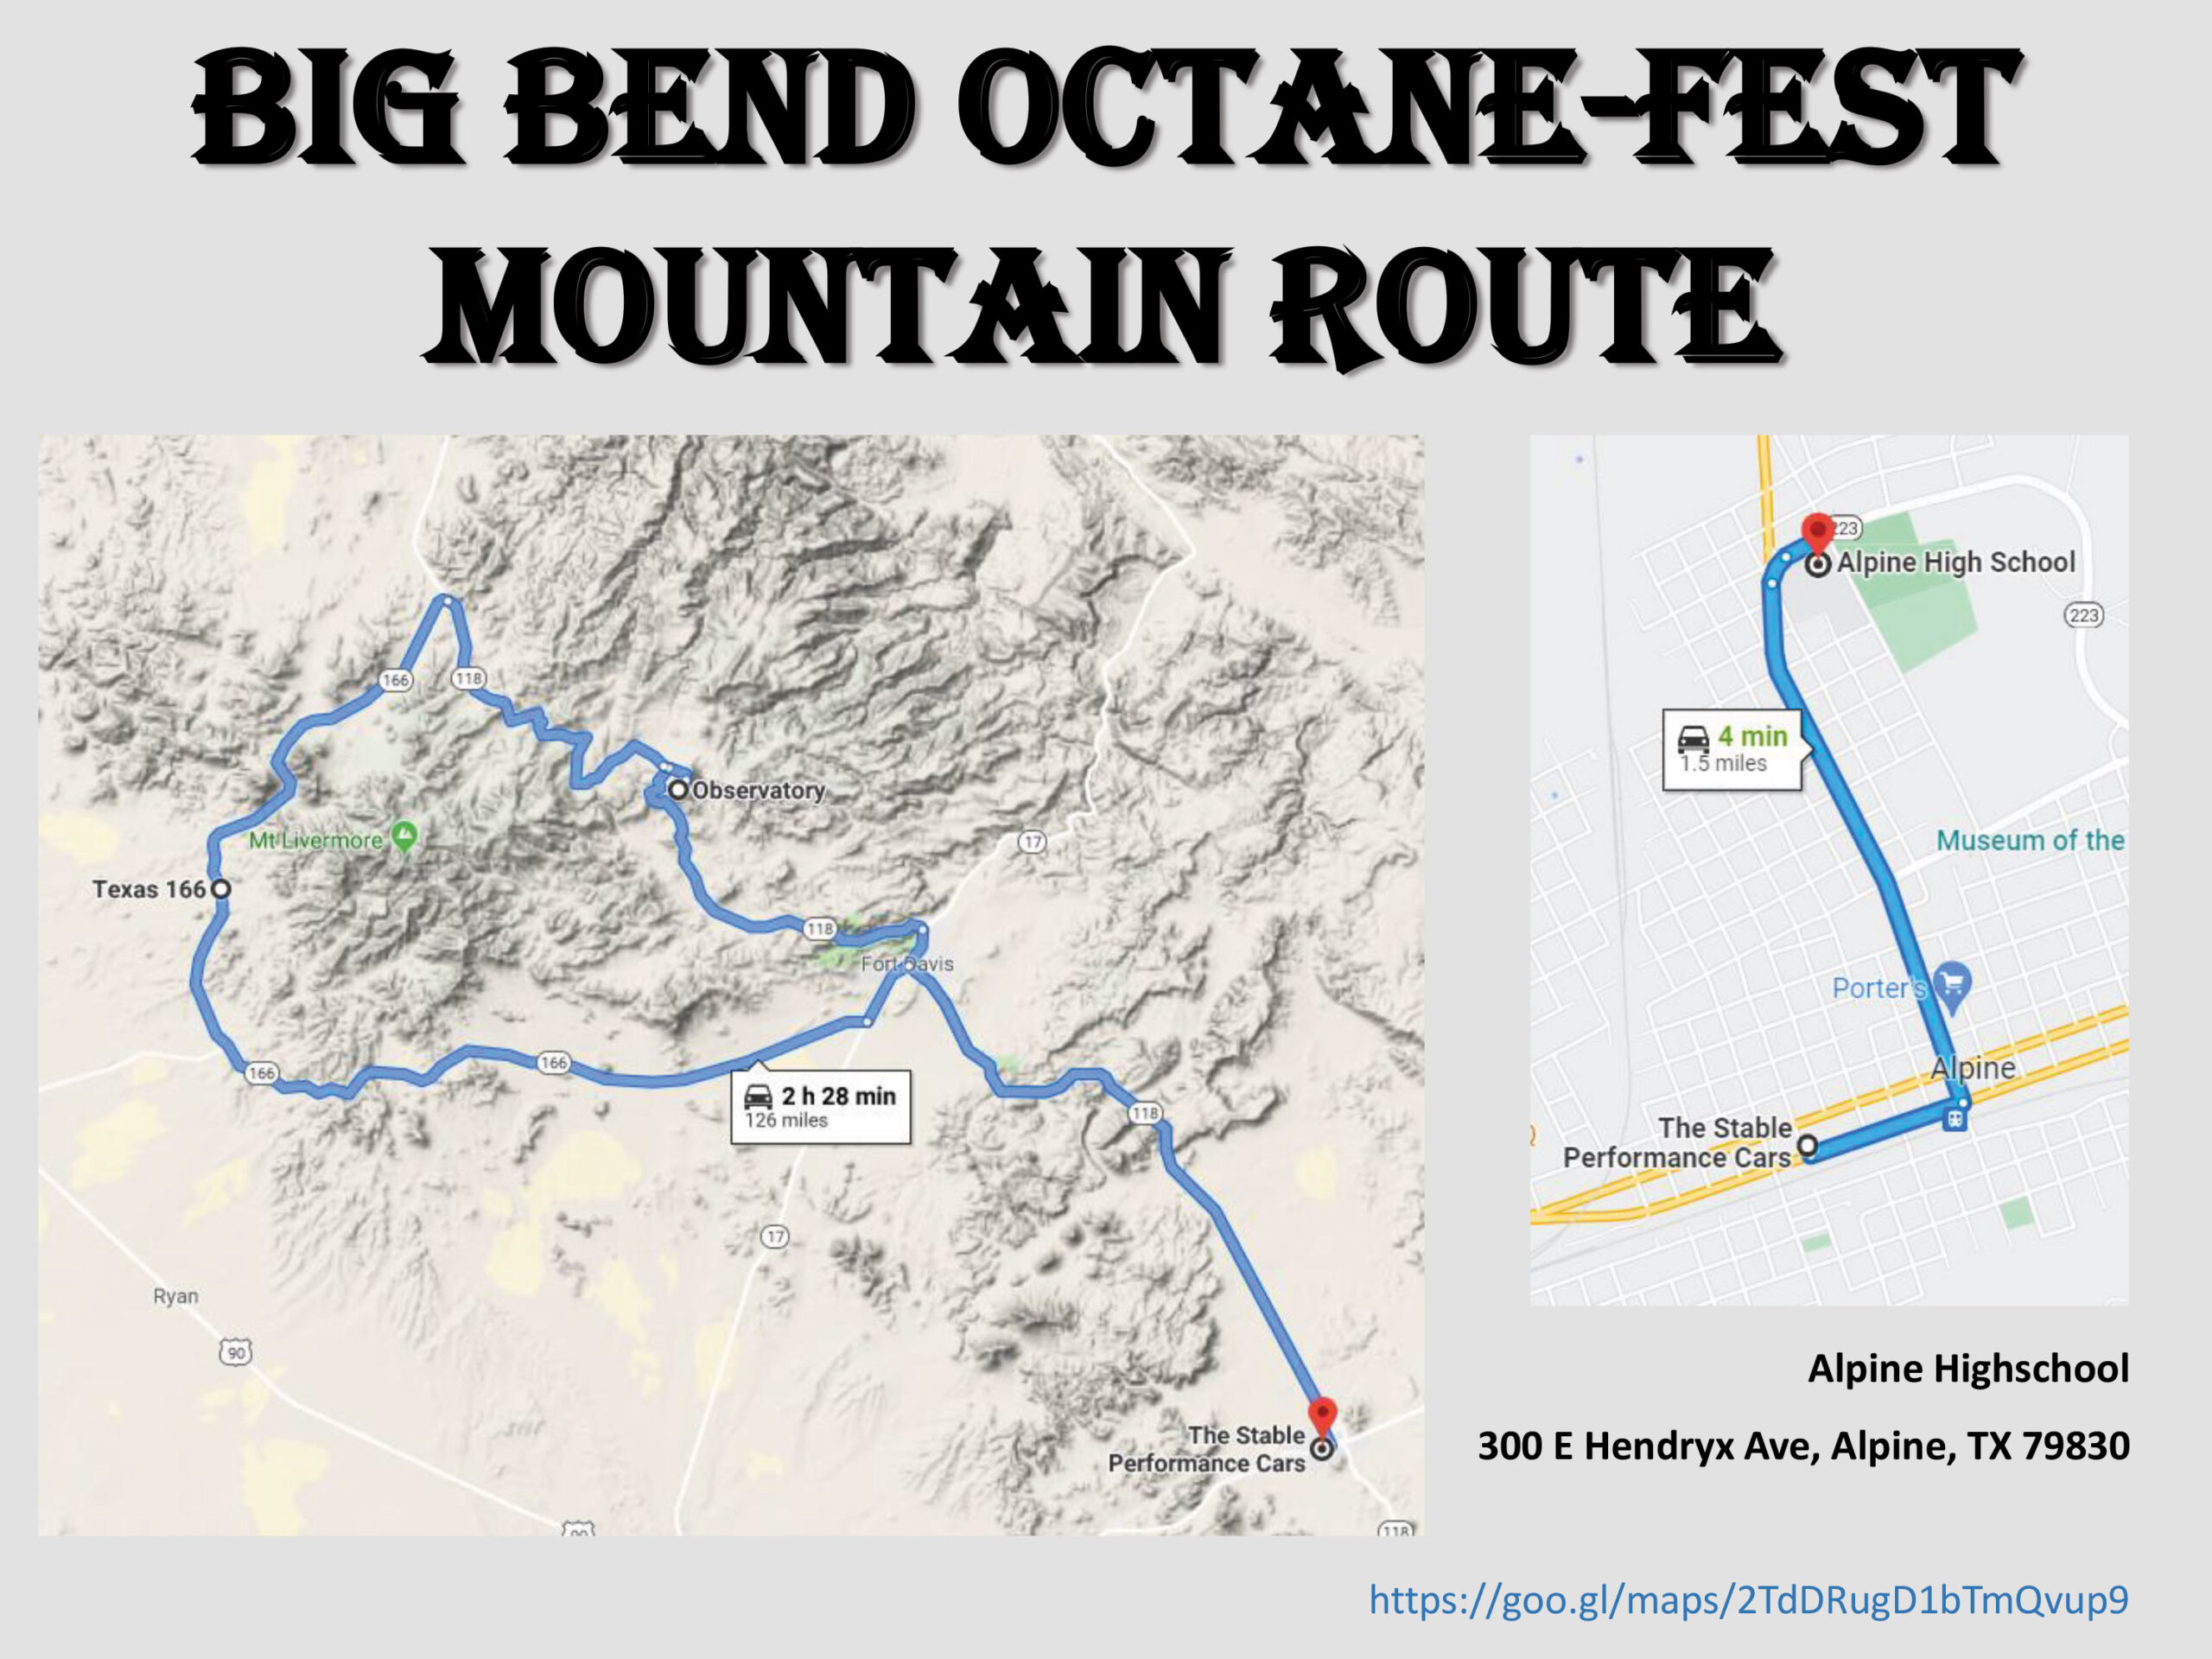 Map of the Big Bend Octane Fest Mountain Route.